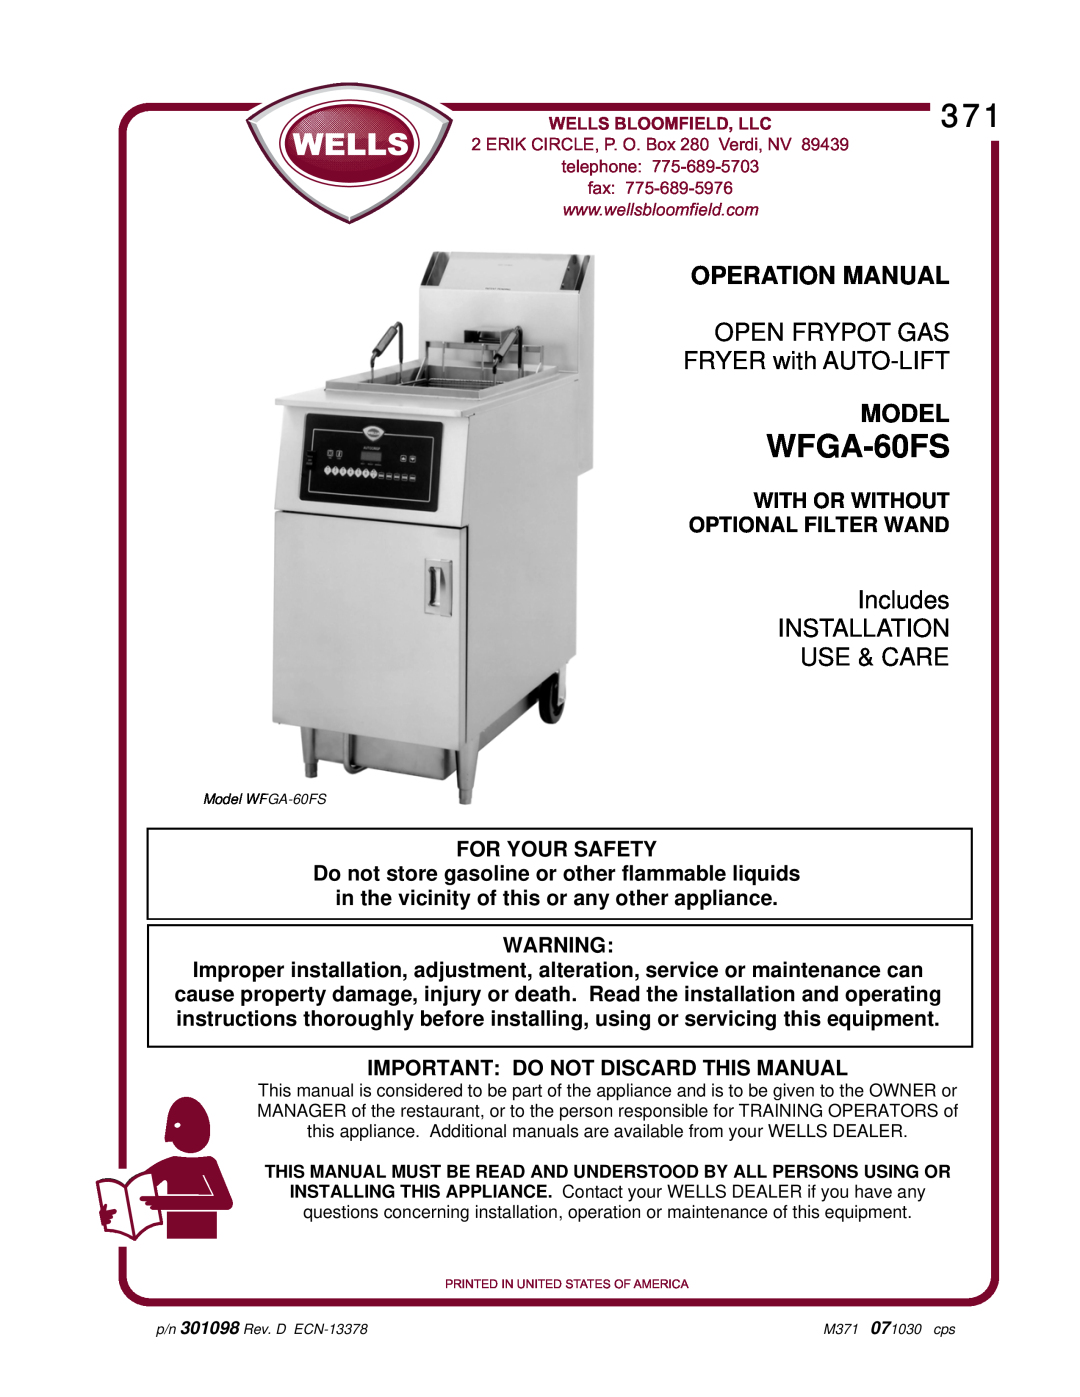 Wells WFGA-60FS operation manual With Or Without Optional Filter Wand, Important Do Not Discard This Manual, Model 